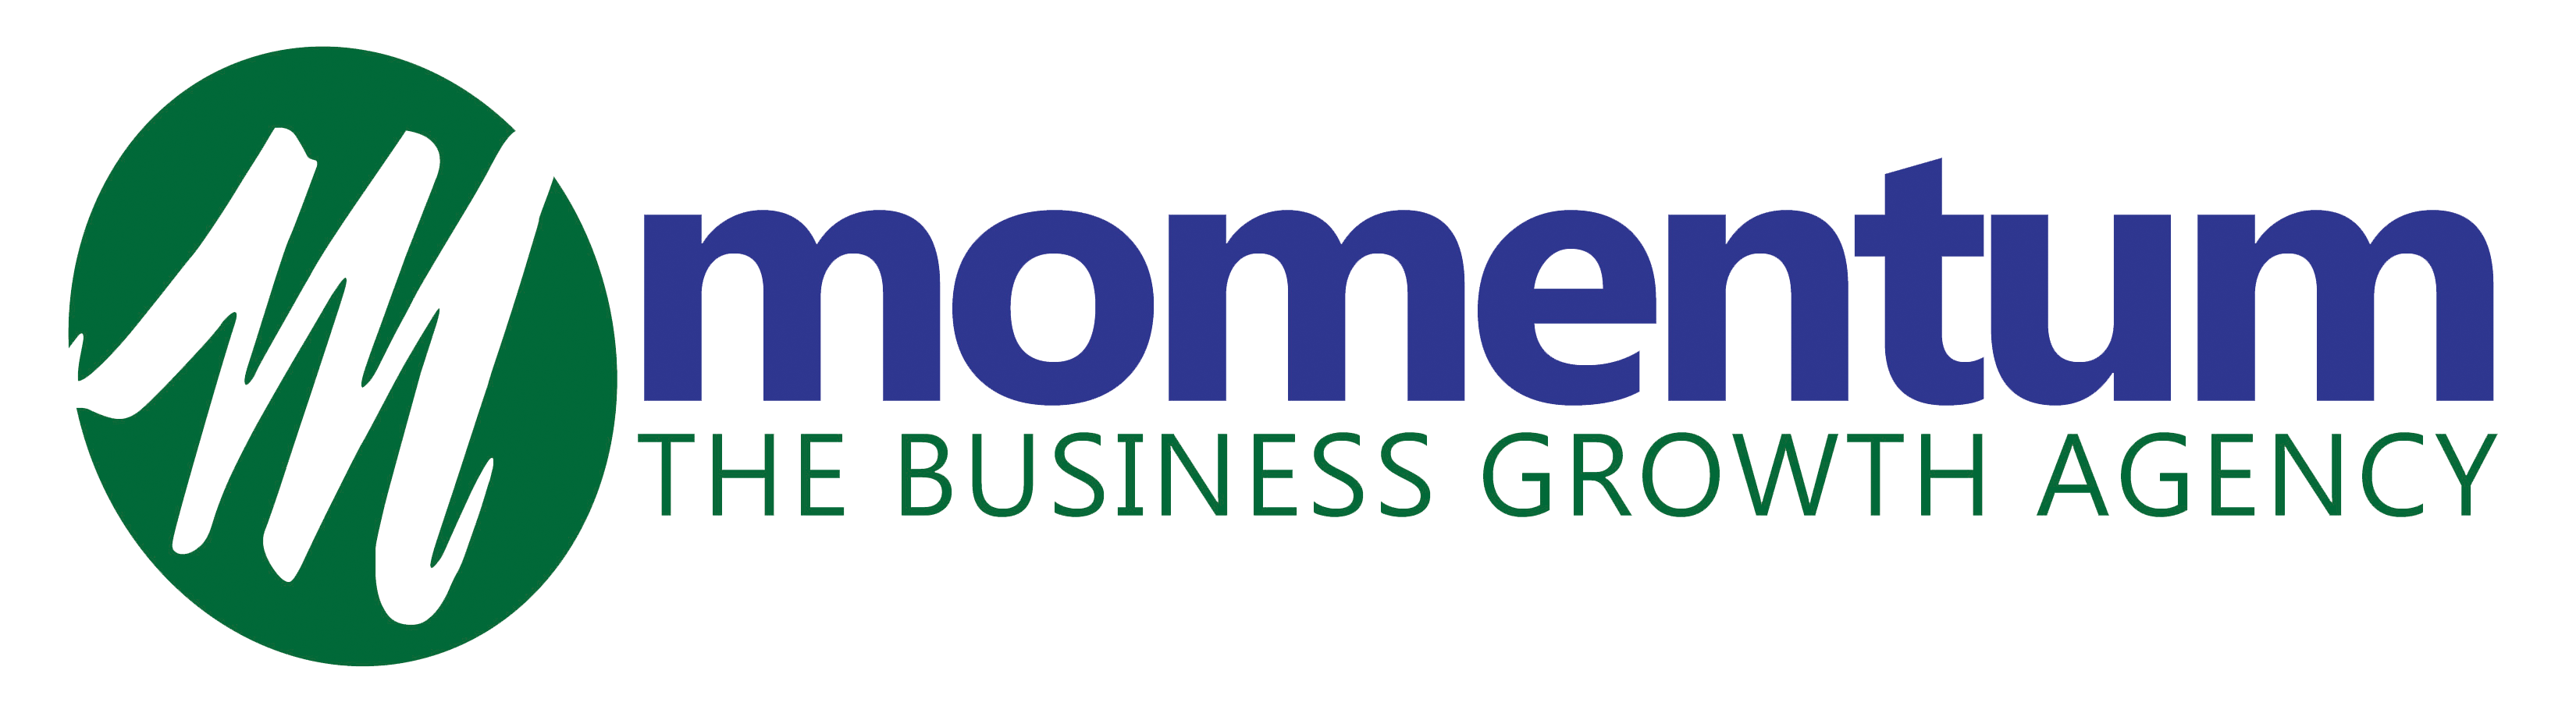 Momentum - The Business Growth Agency